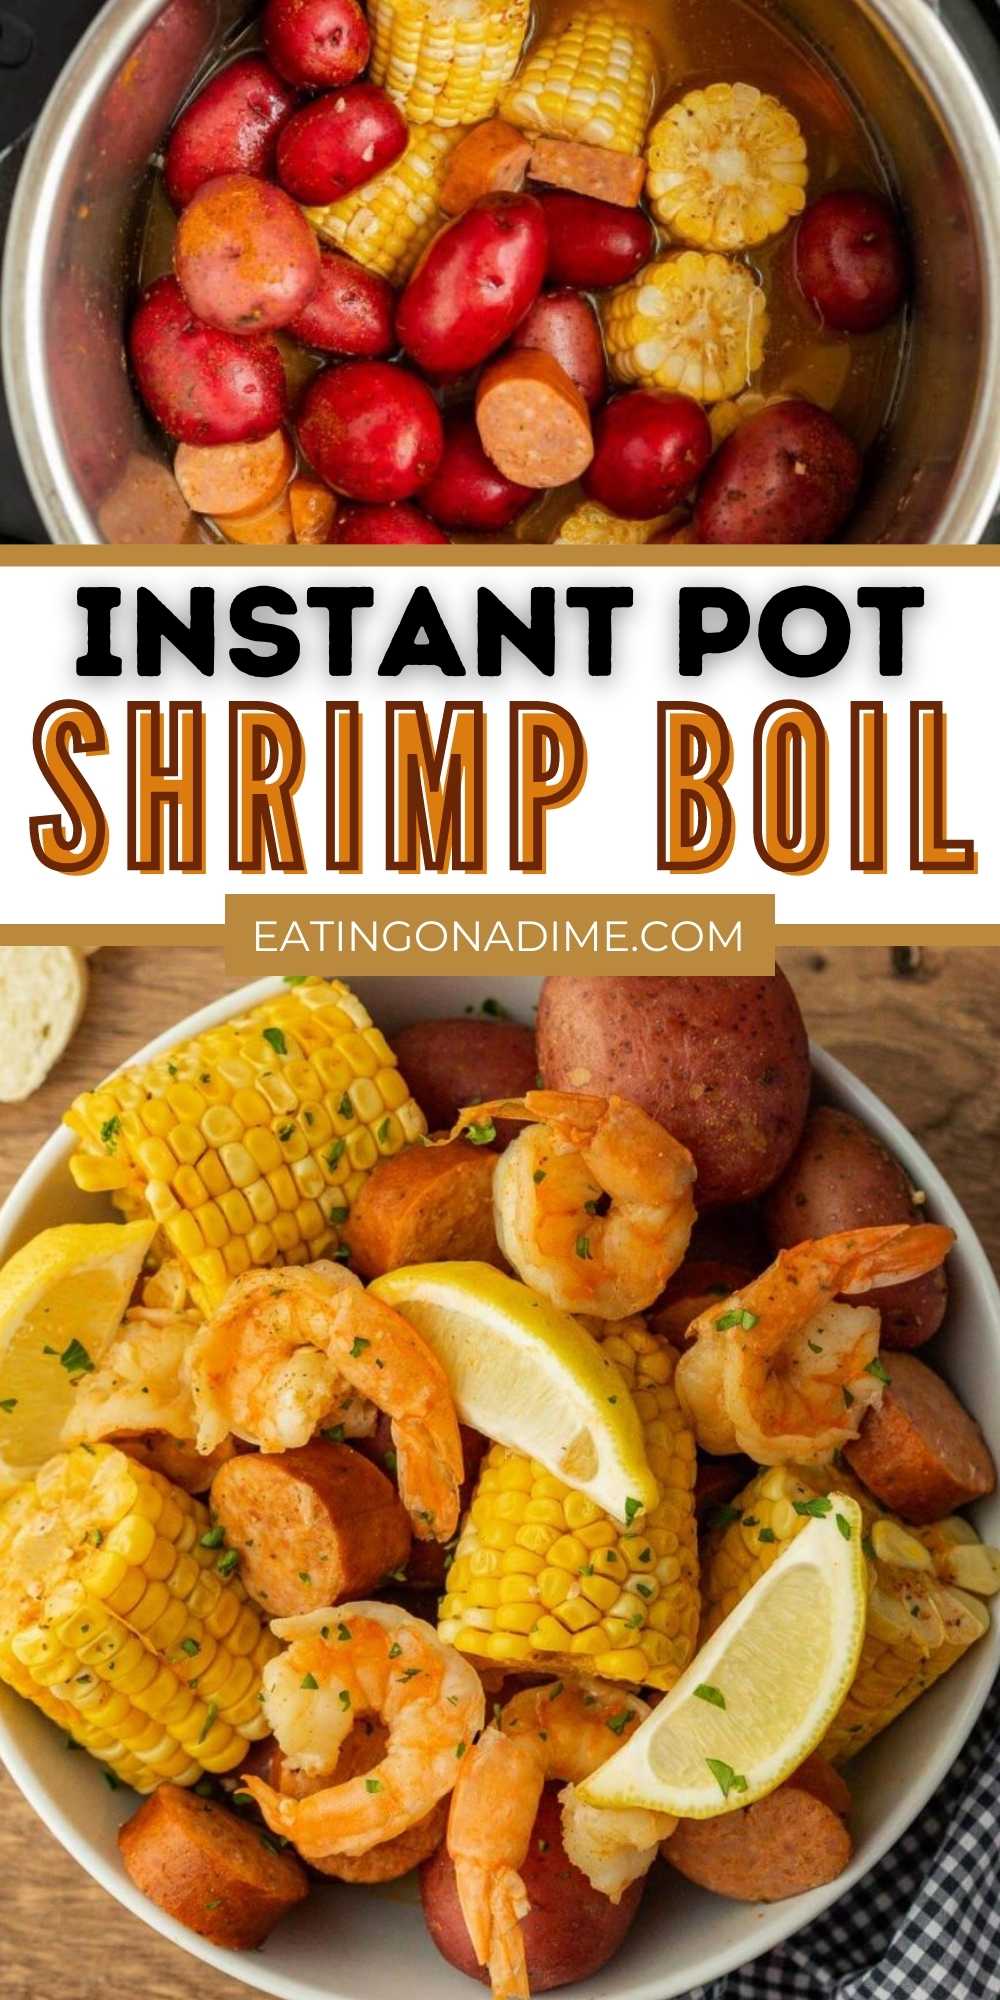 Let the pressure cooker do all the work and make this quick and easy Instant Pot Shrimp Boil. Loaded with flavor and taste amazing. The ingredients cook to tender and make a crowd pleasing dinner. Pressure cook your favorite shrimp boil ingredients for an amazing seafood dinner. Instant Pot cooks this shrimp boil to perfection. #eatingonadime #instantpotshrimpboil #shrimpboil